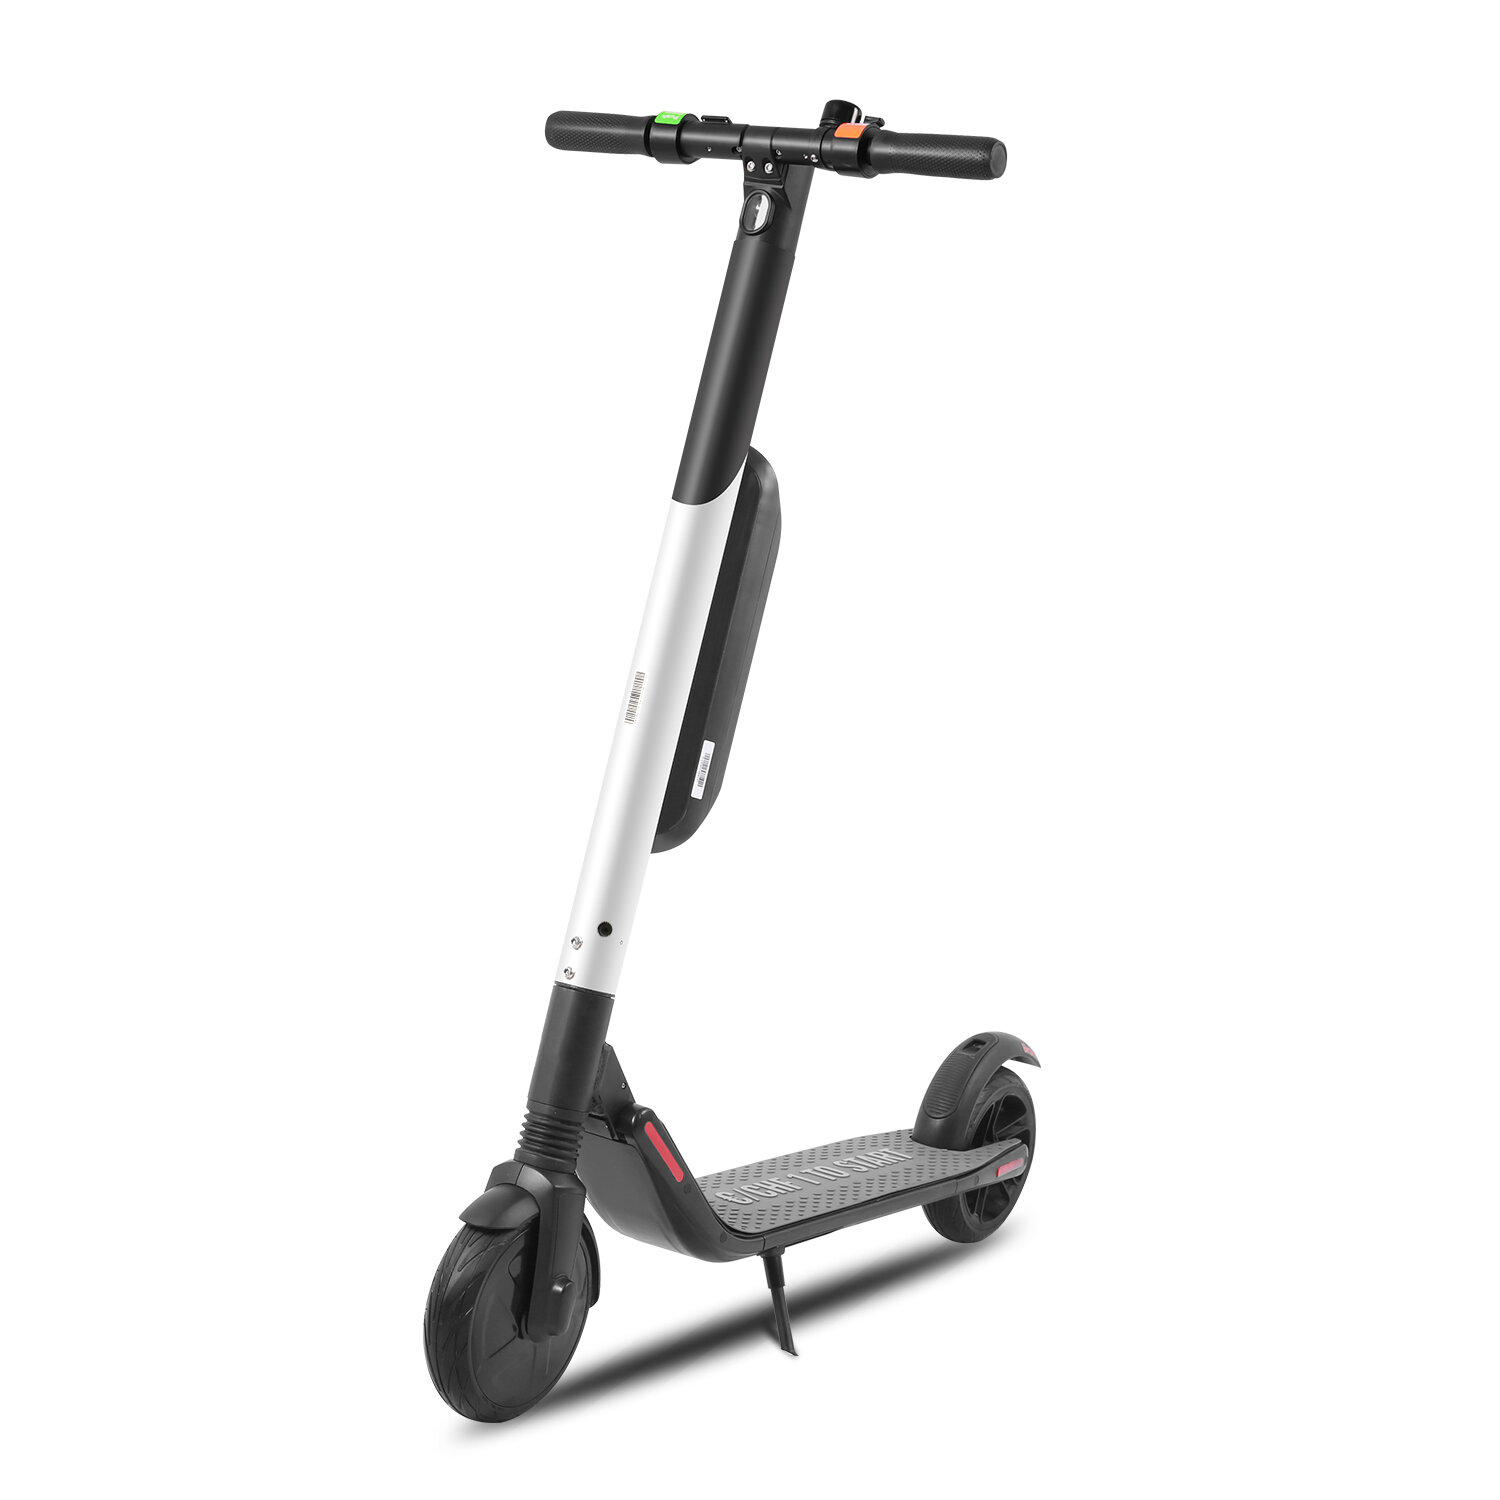 Image of [EU DIRECT] Ninebot ES4 Electric Scooter 350W Motor 36V 104Ah Battery 85inch Solid Tires 35KM Max Mileage 120KG Max Lo